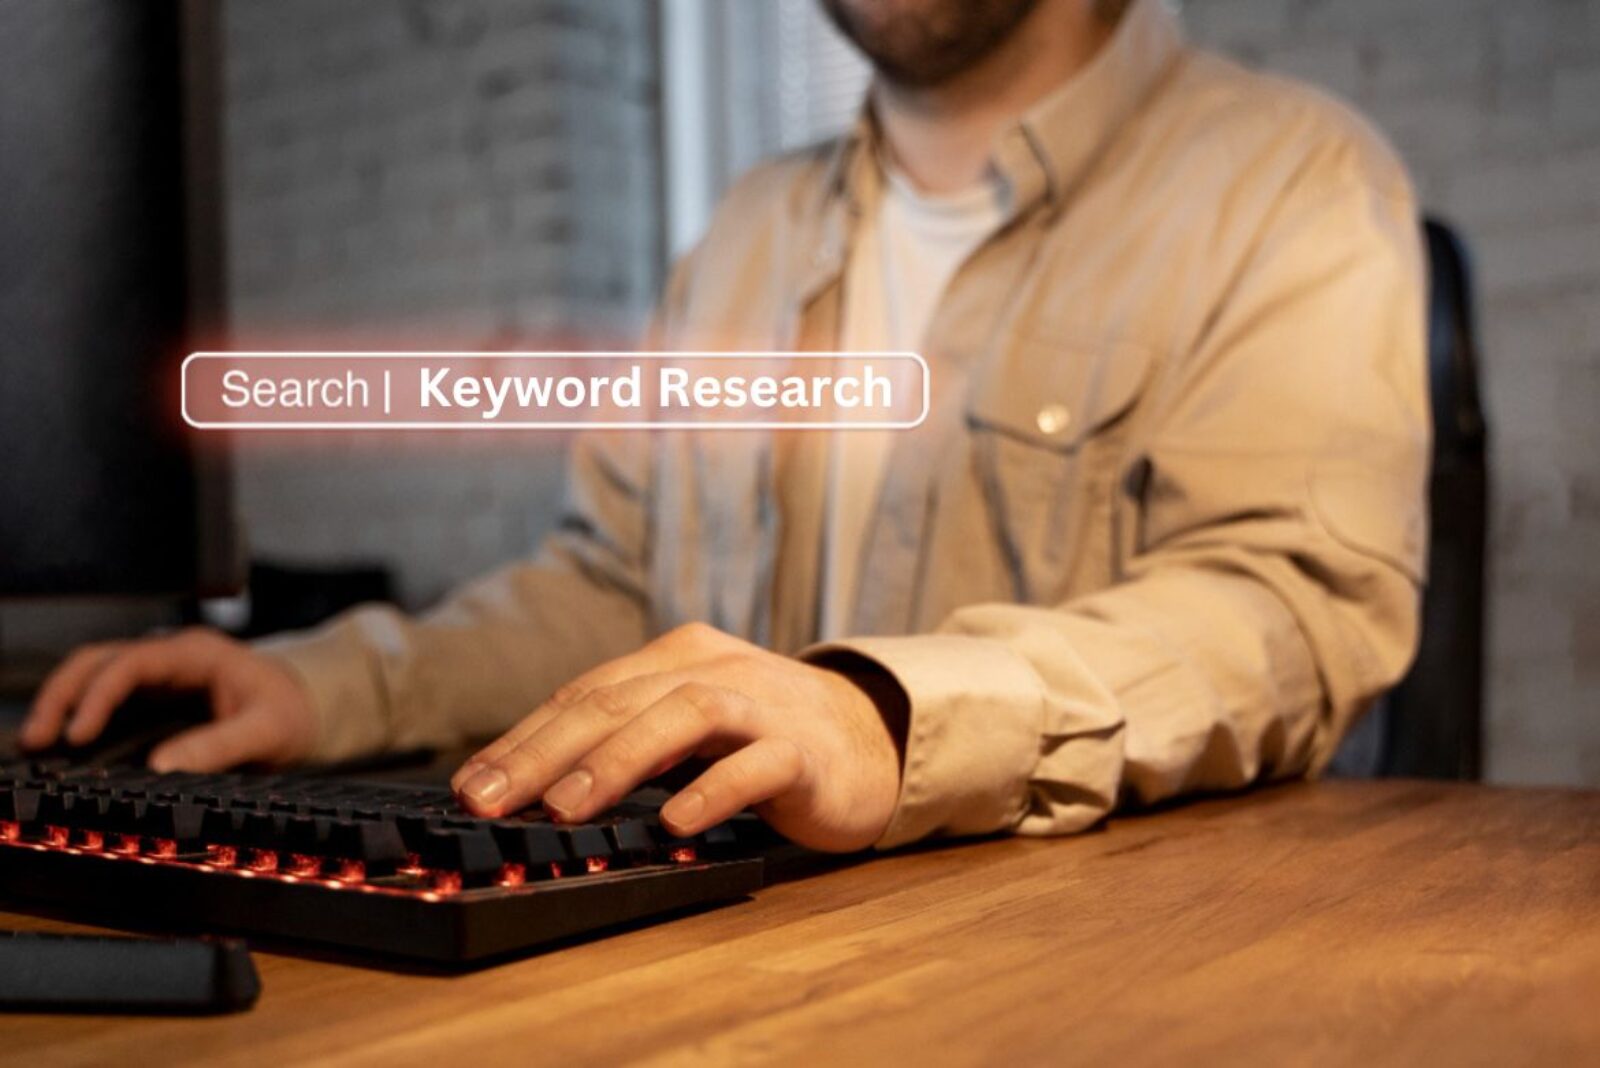 person conducting keyword research on laptop